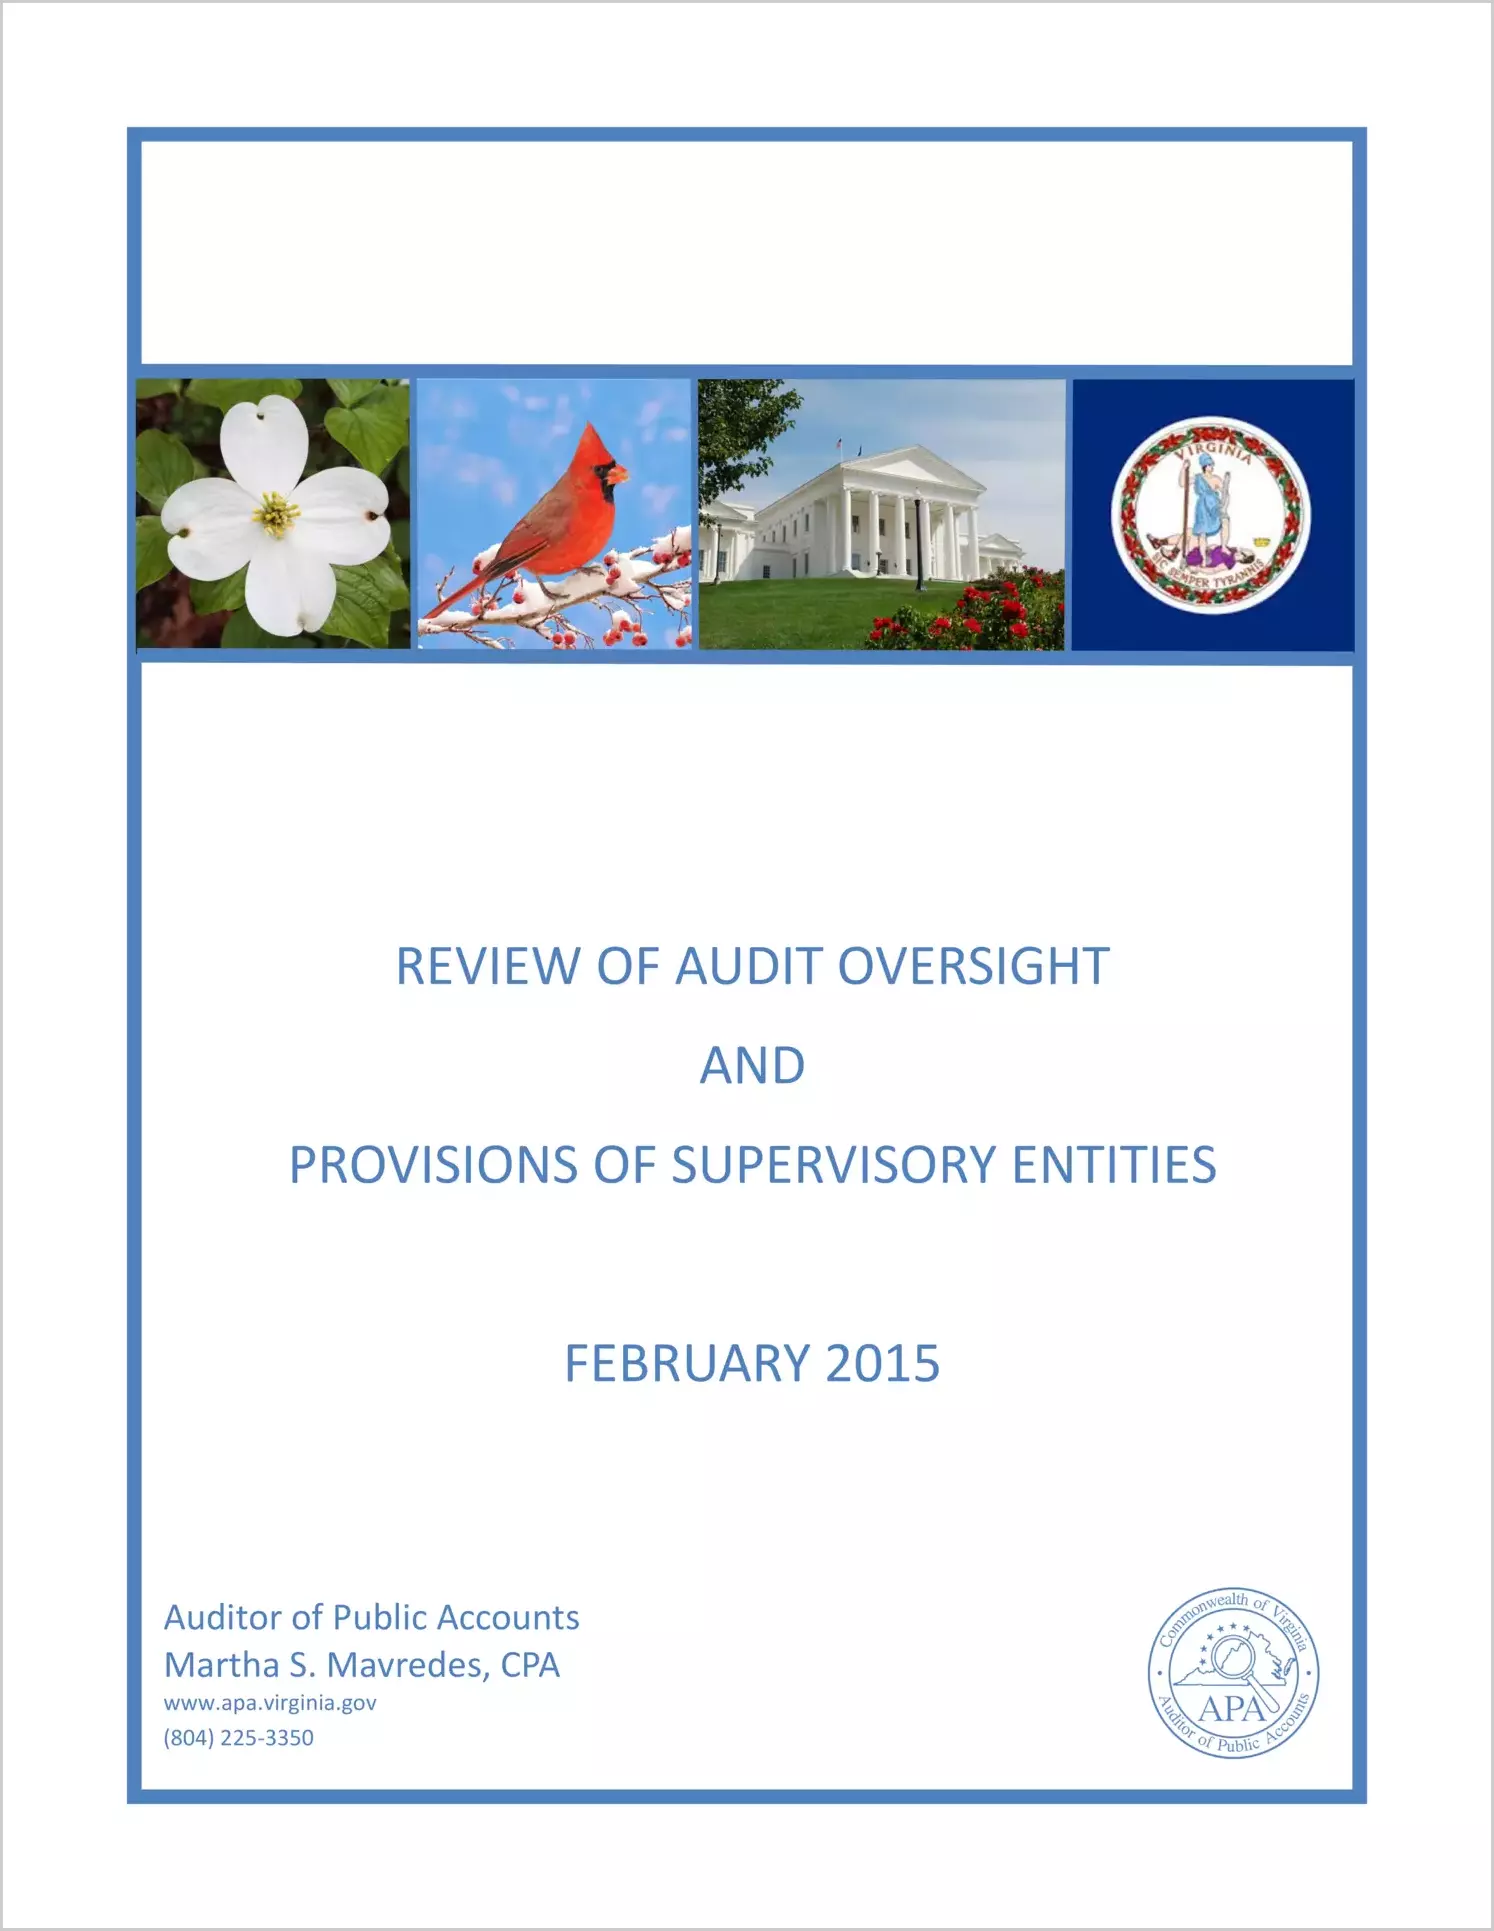 Review of Audit Oversight and Provisions of Supervisory Entites - February 2015